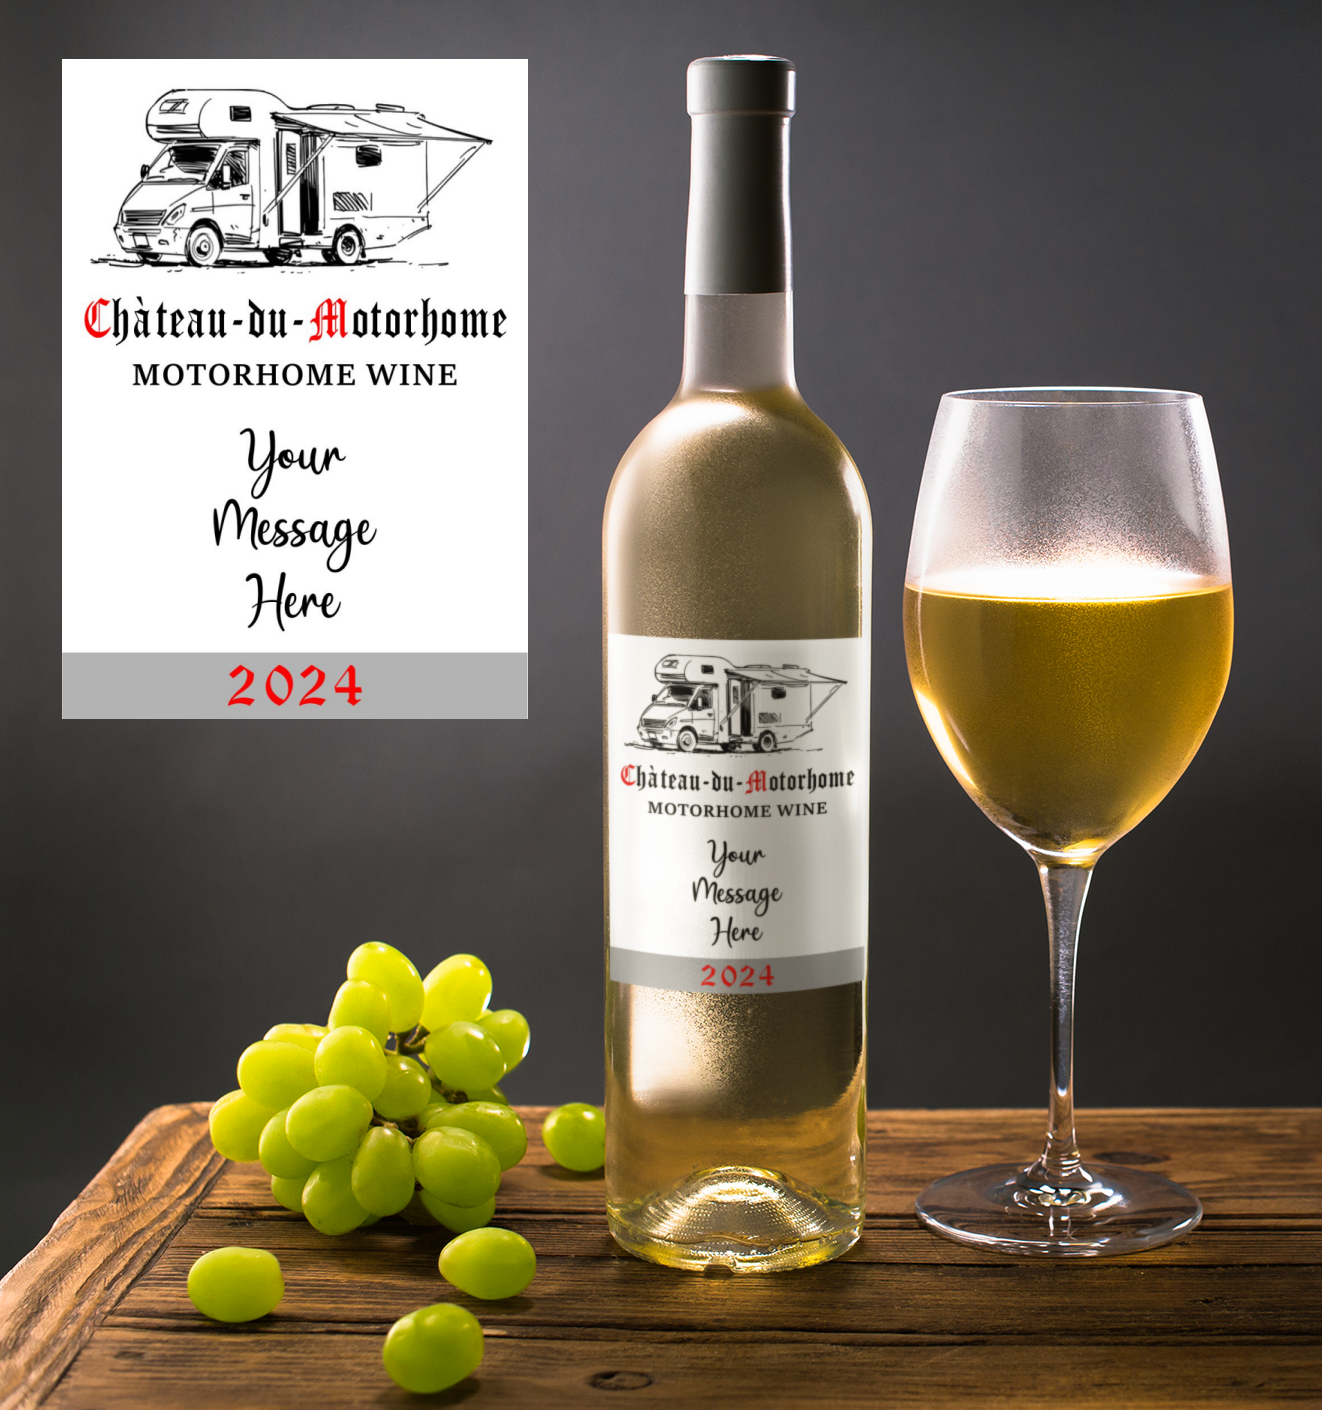 Motorhome Wine Bottle Label x2 - Chateau du Motorhome - Personalise Year & Message - To fit Most Alcohol Bottles Custom Gift